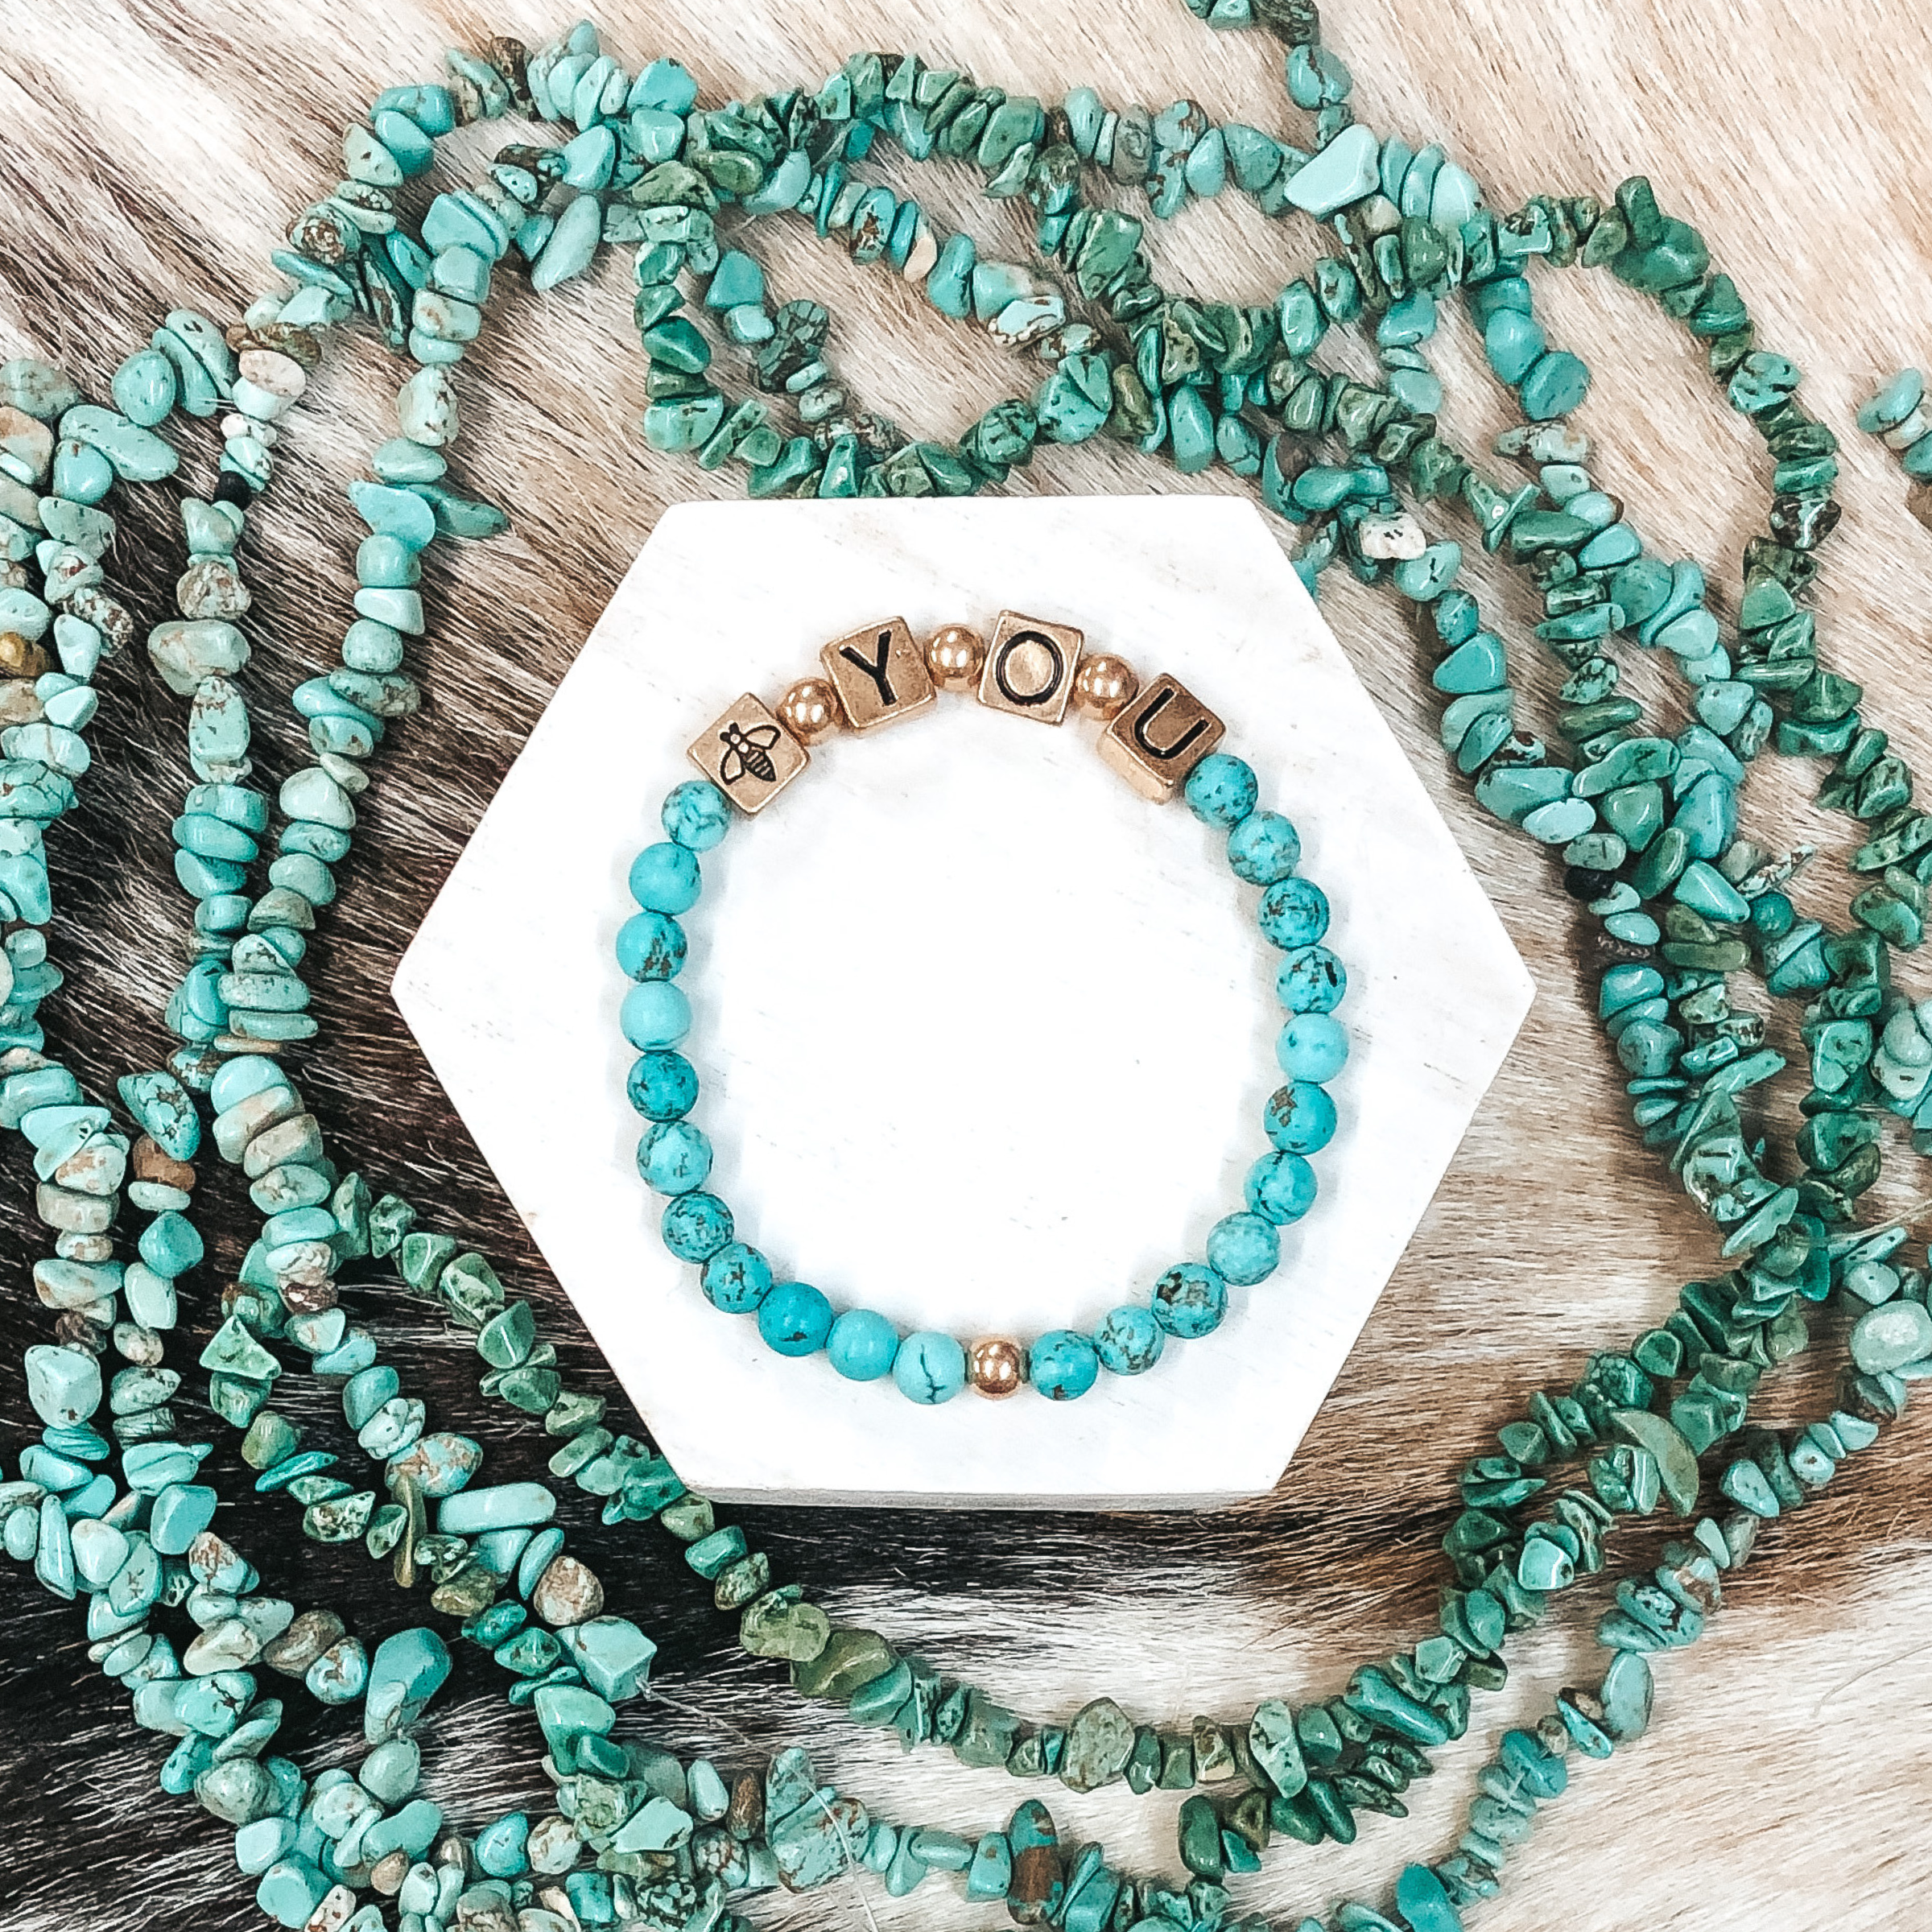 Just Bee You Bracelet in Turquoise - Giddy Up Glamour Boutique